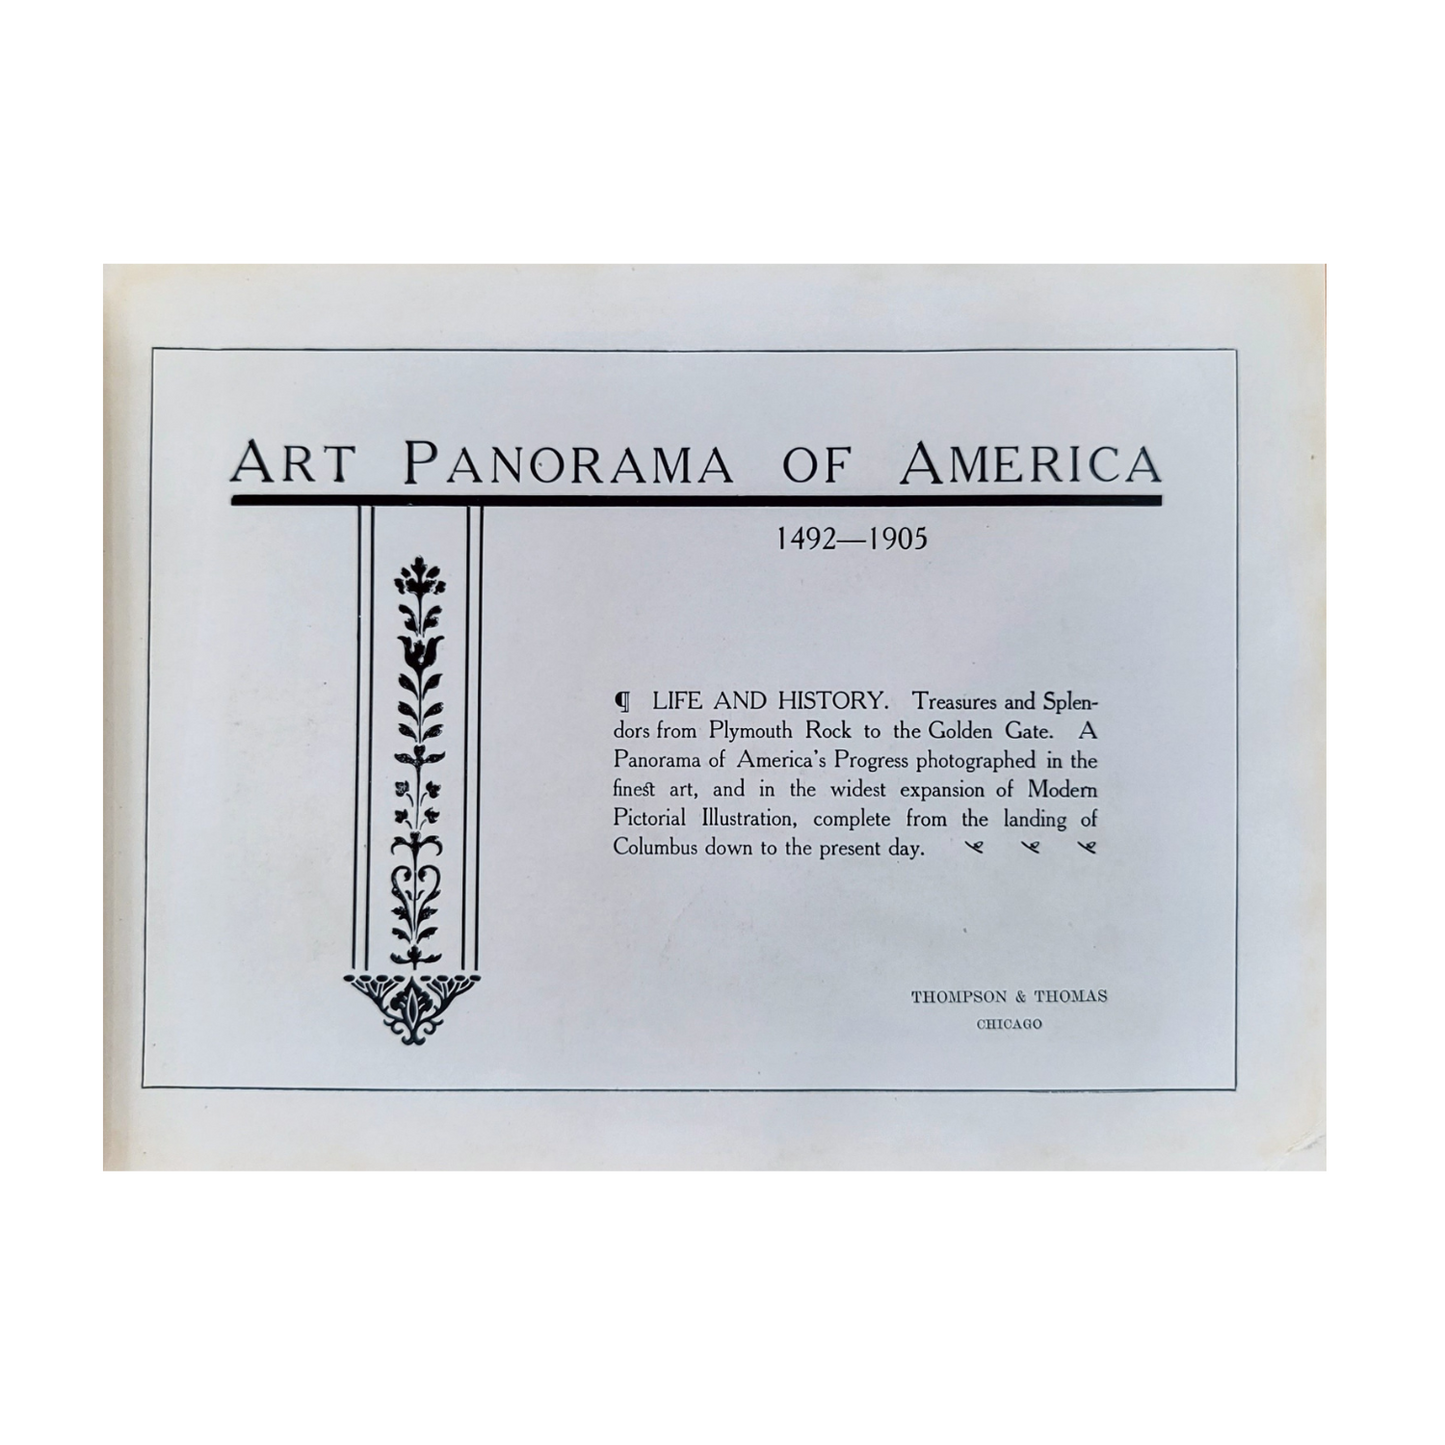 "Art Panorama of America 1492-1905" - First Edition